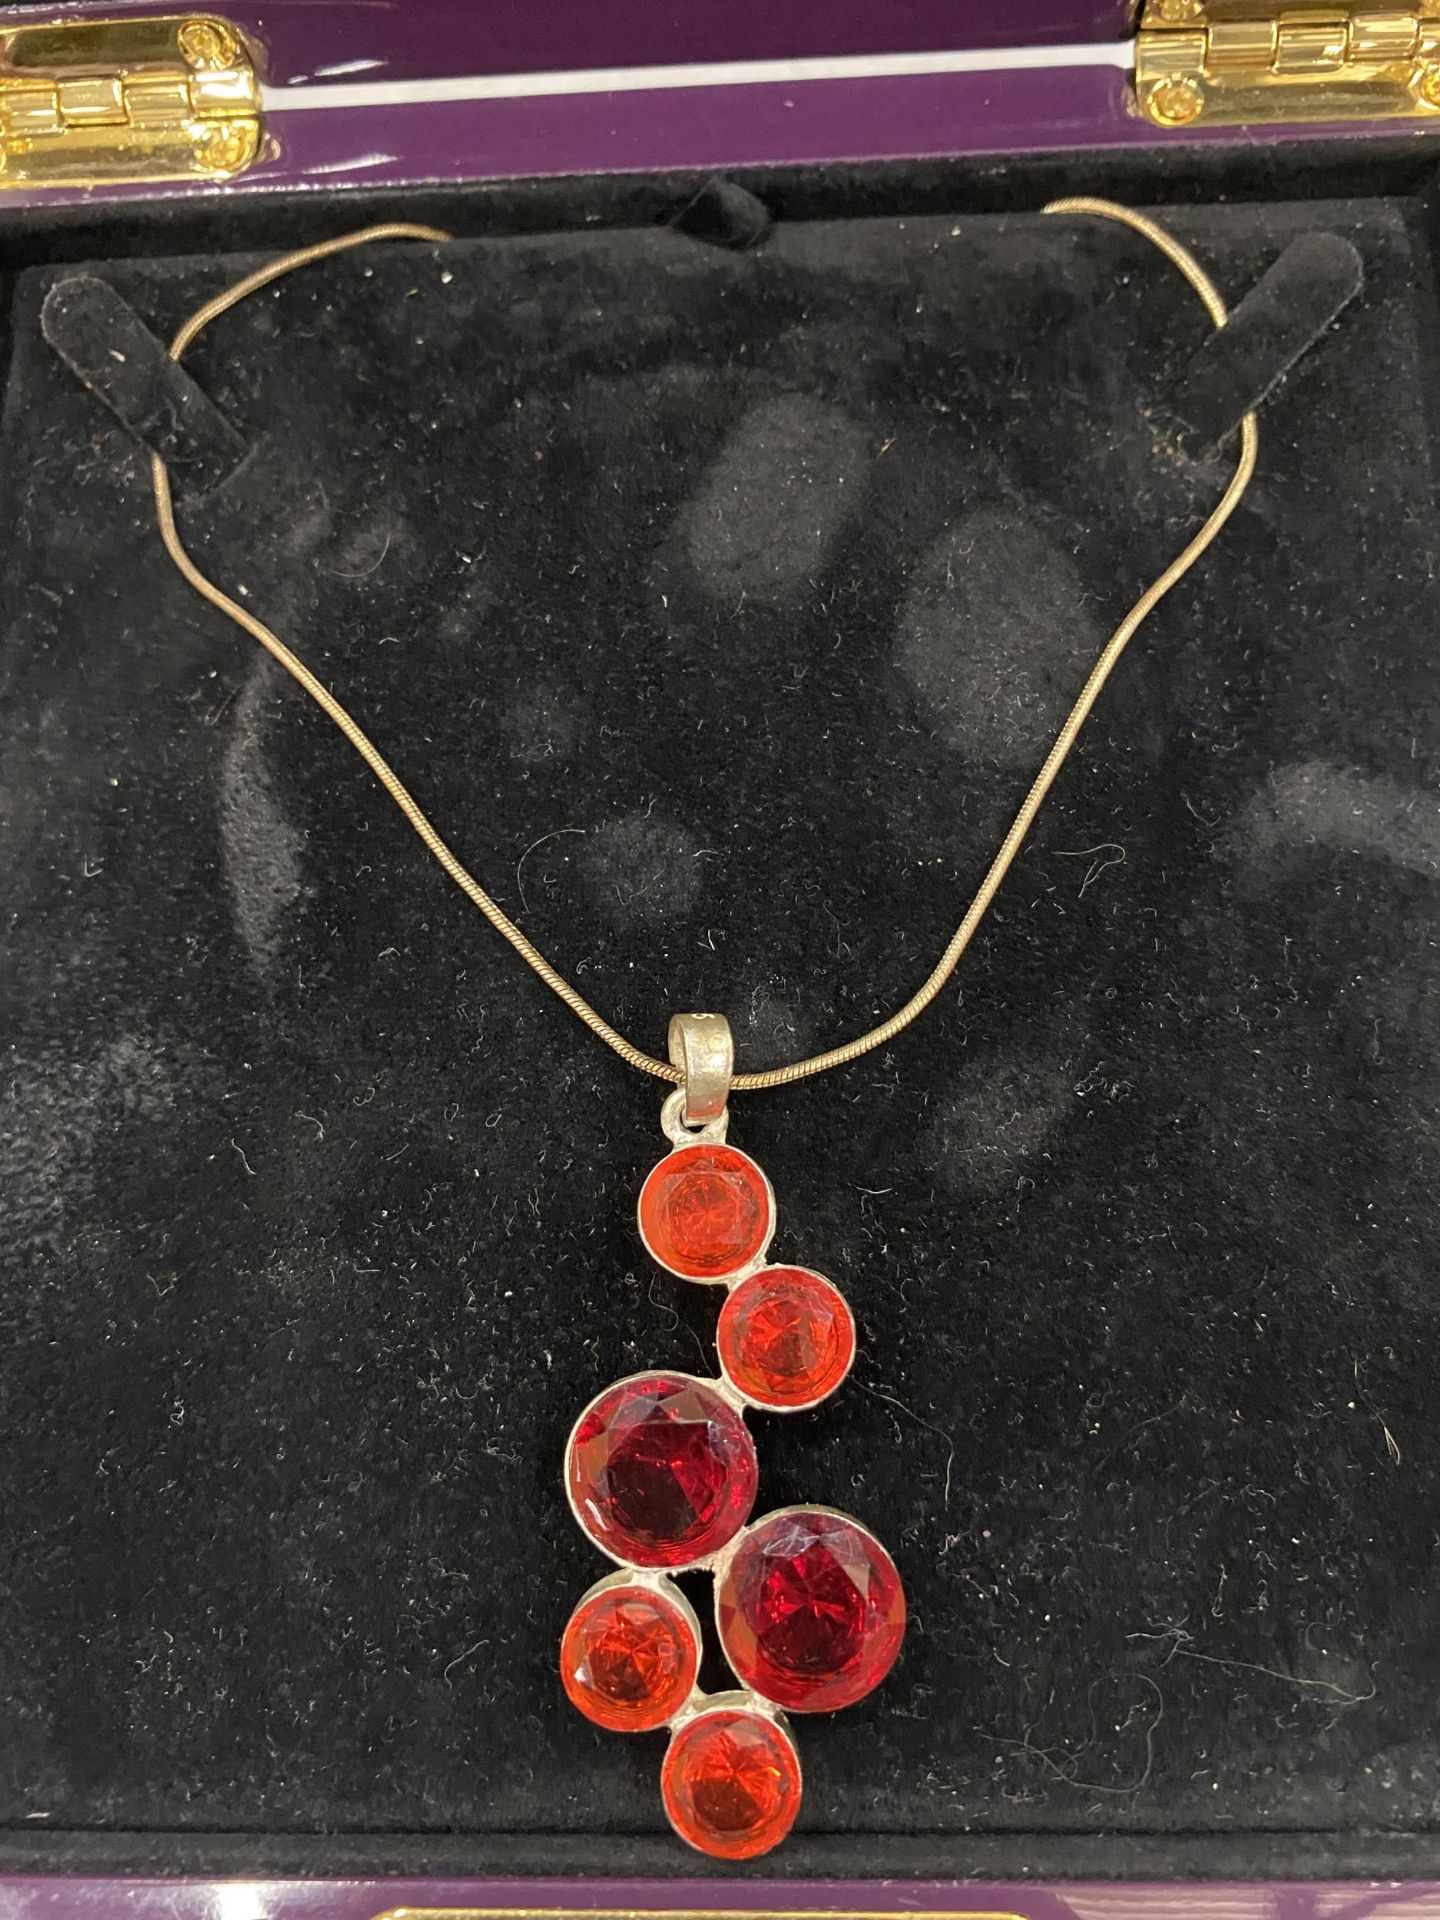 A NECKLACE WITH A LARGE 'CHERRY' DESIGN PENDANT IN PRESENTATION BOX - Image 2 of 3